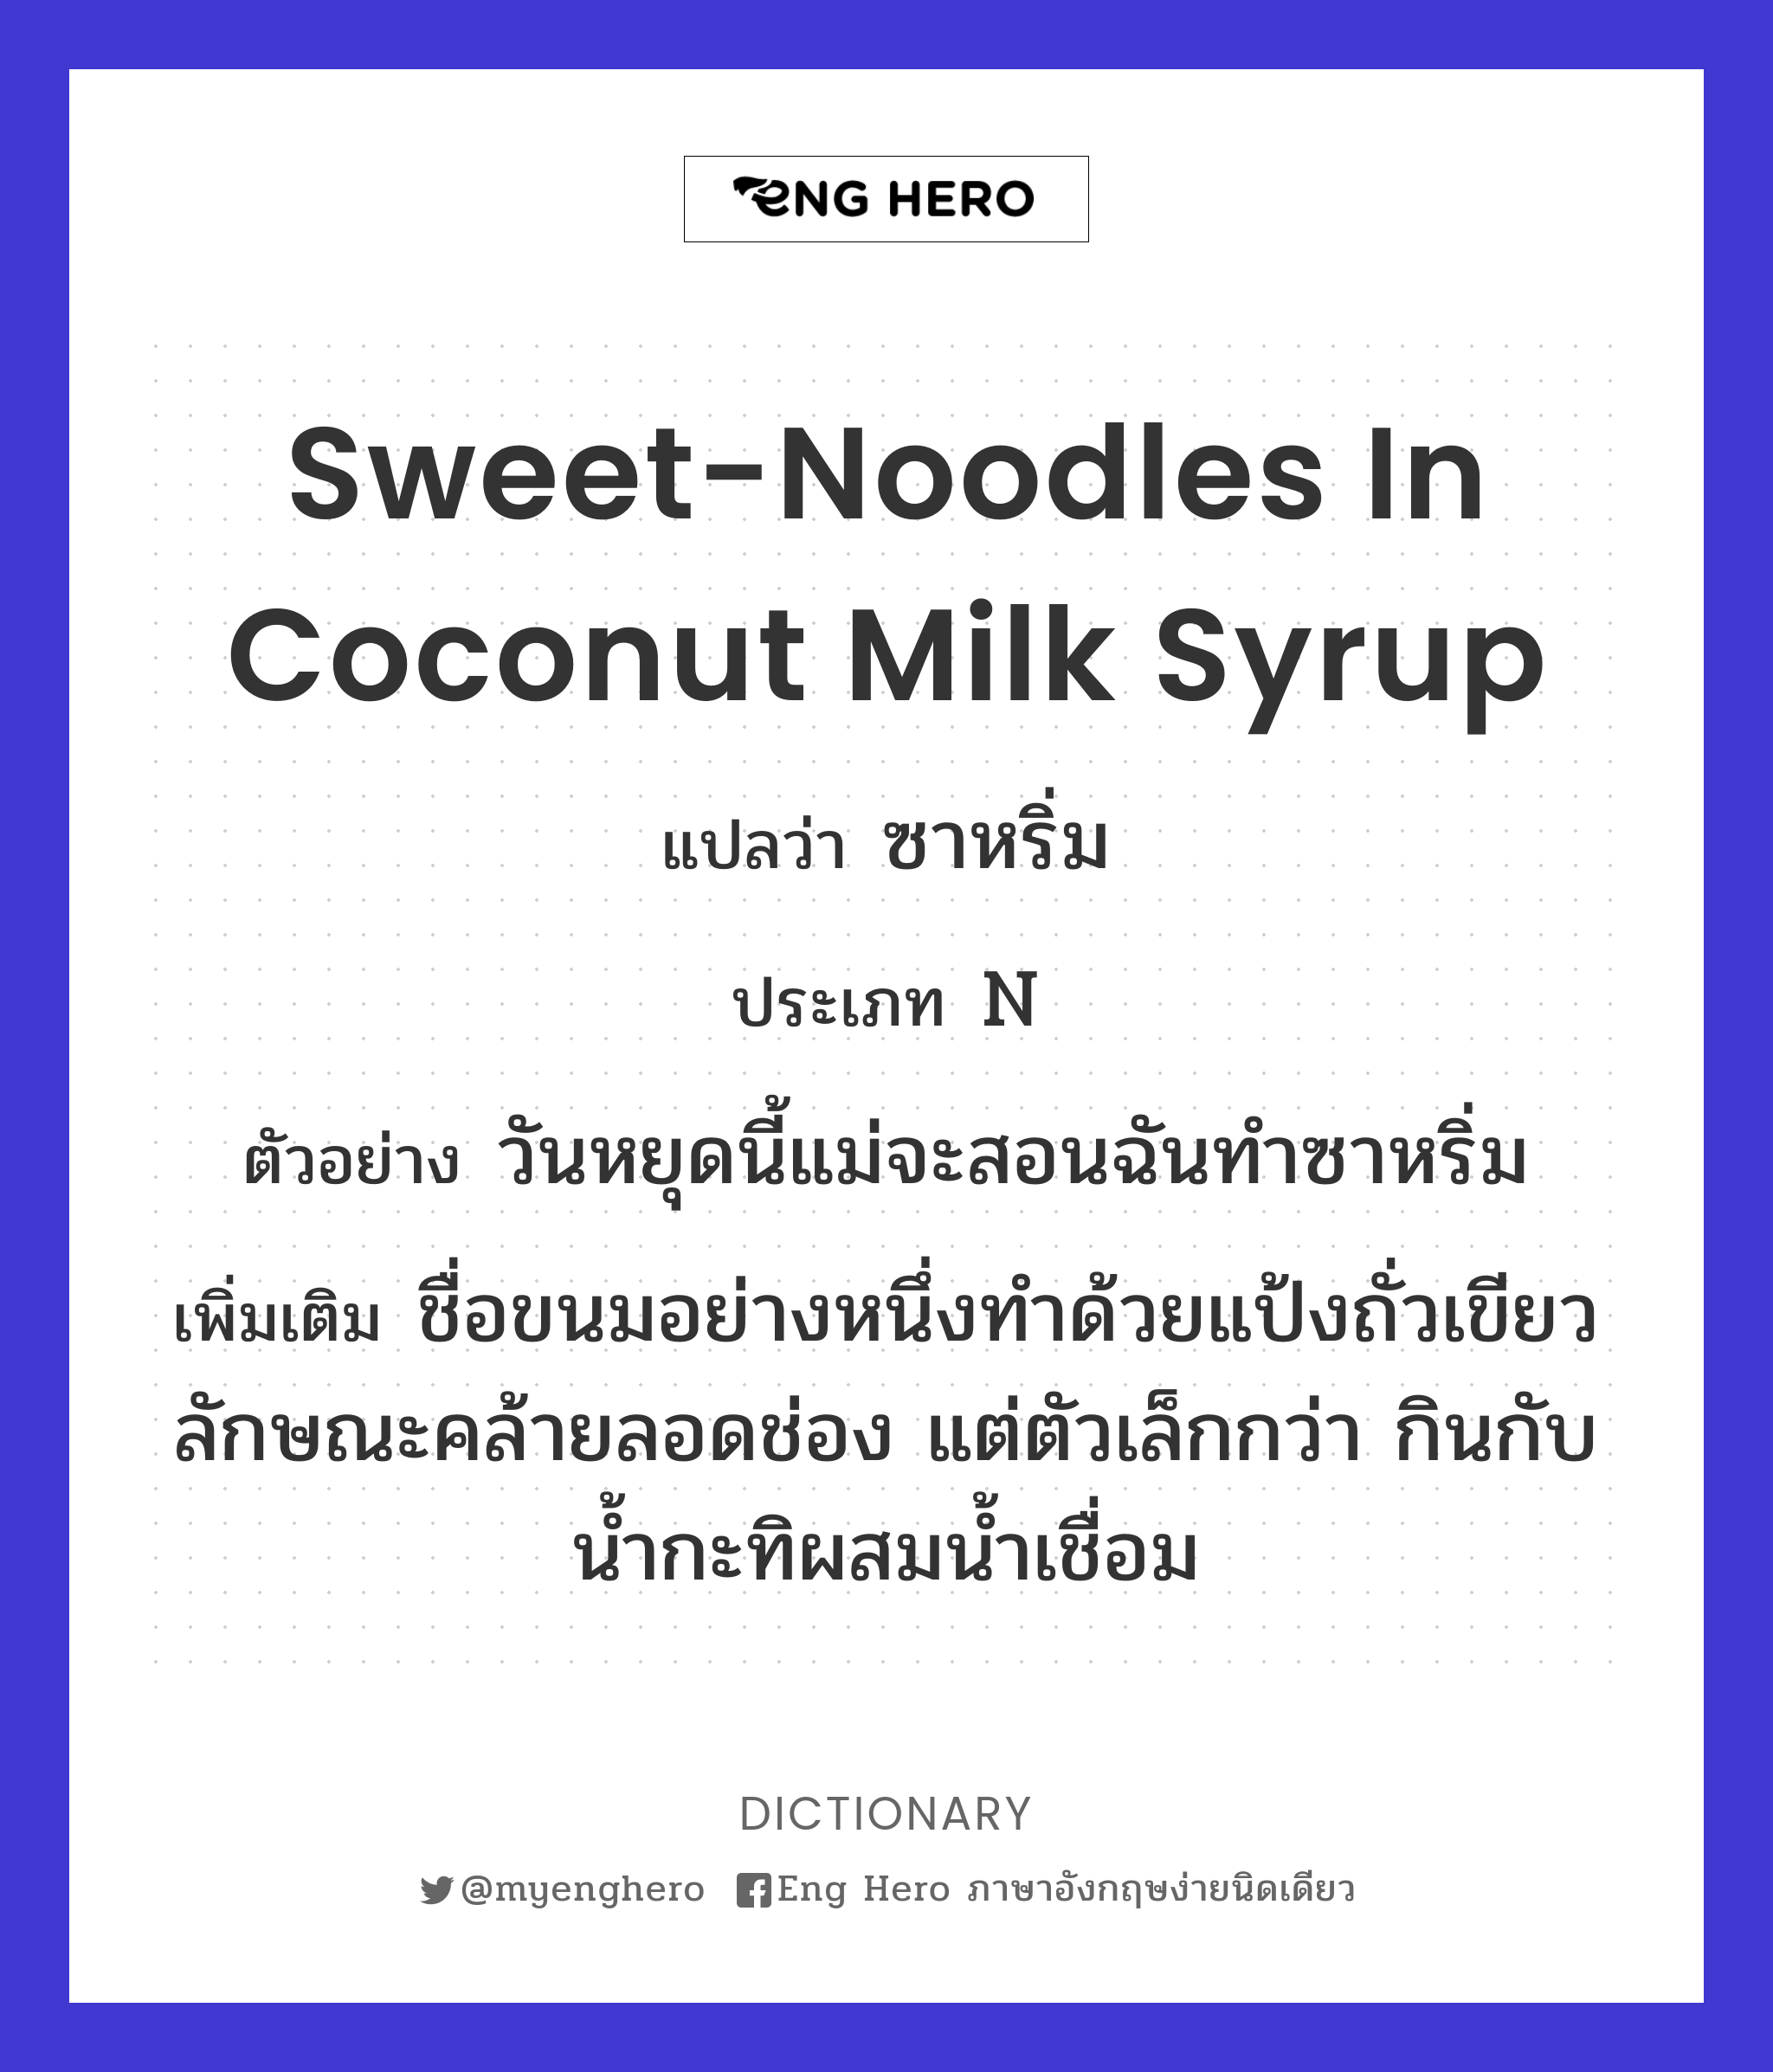 sweet-noodles in coconut milk syrup